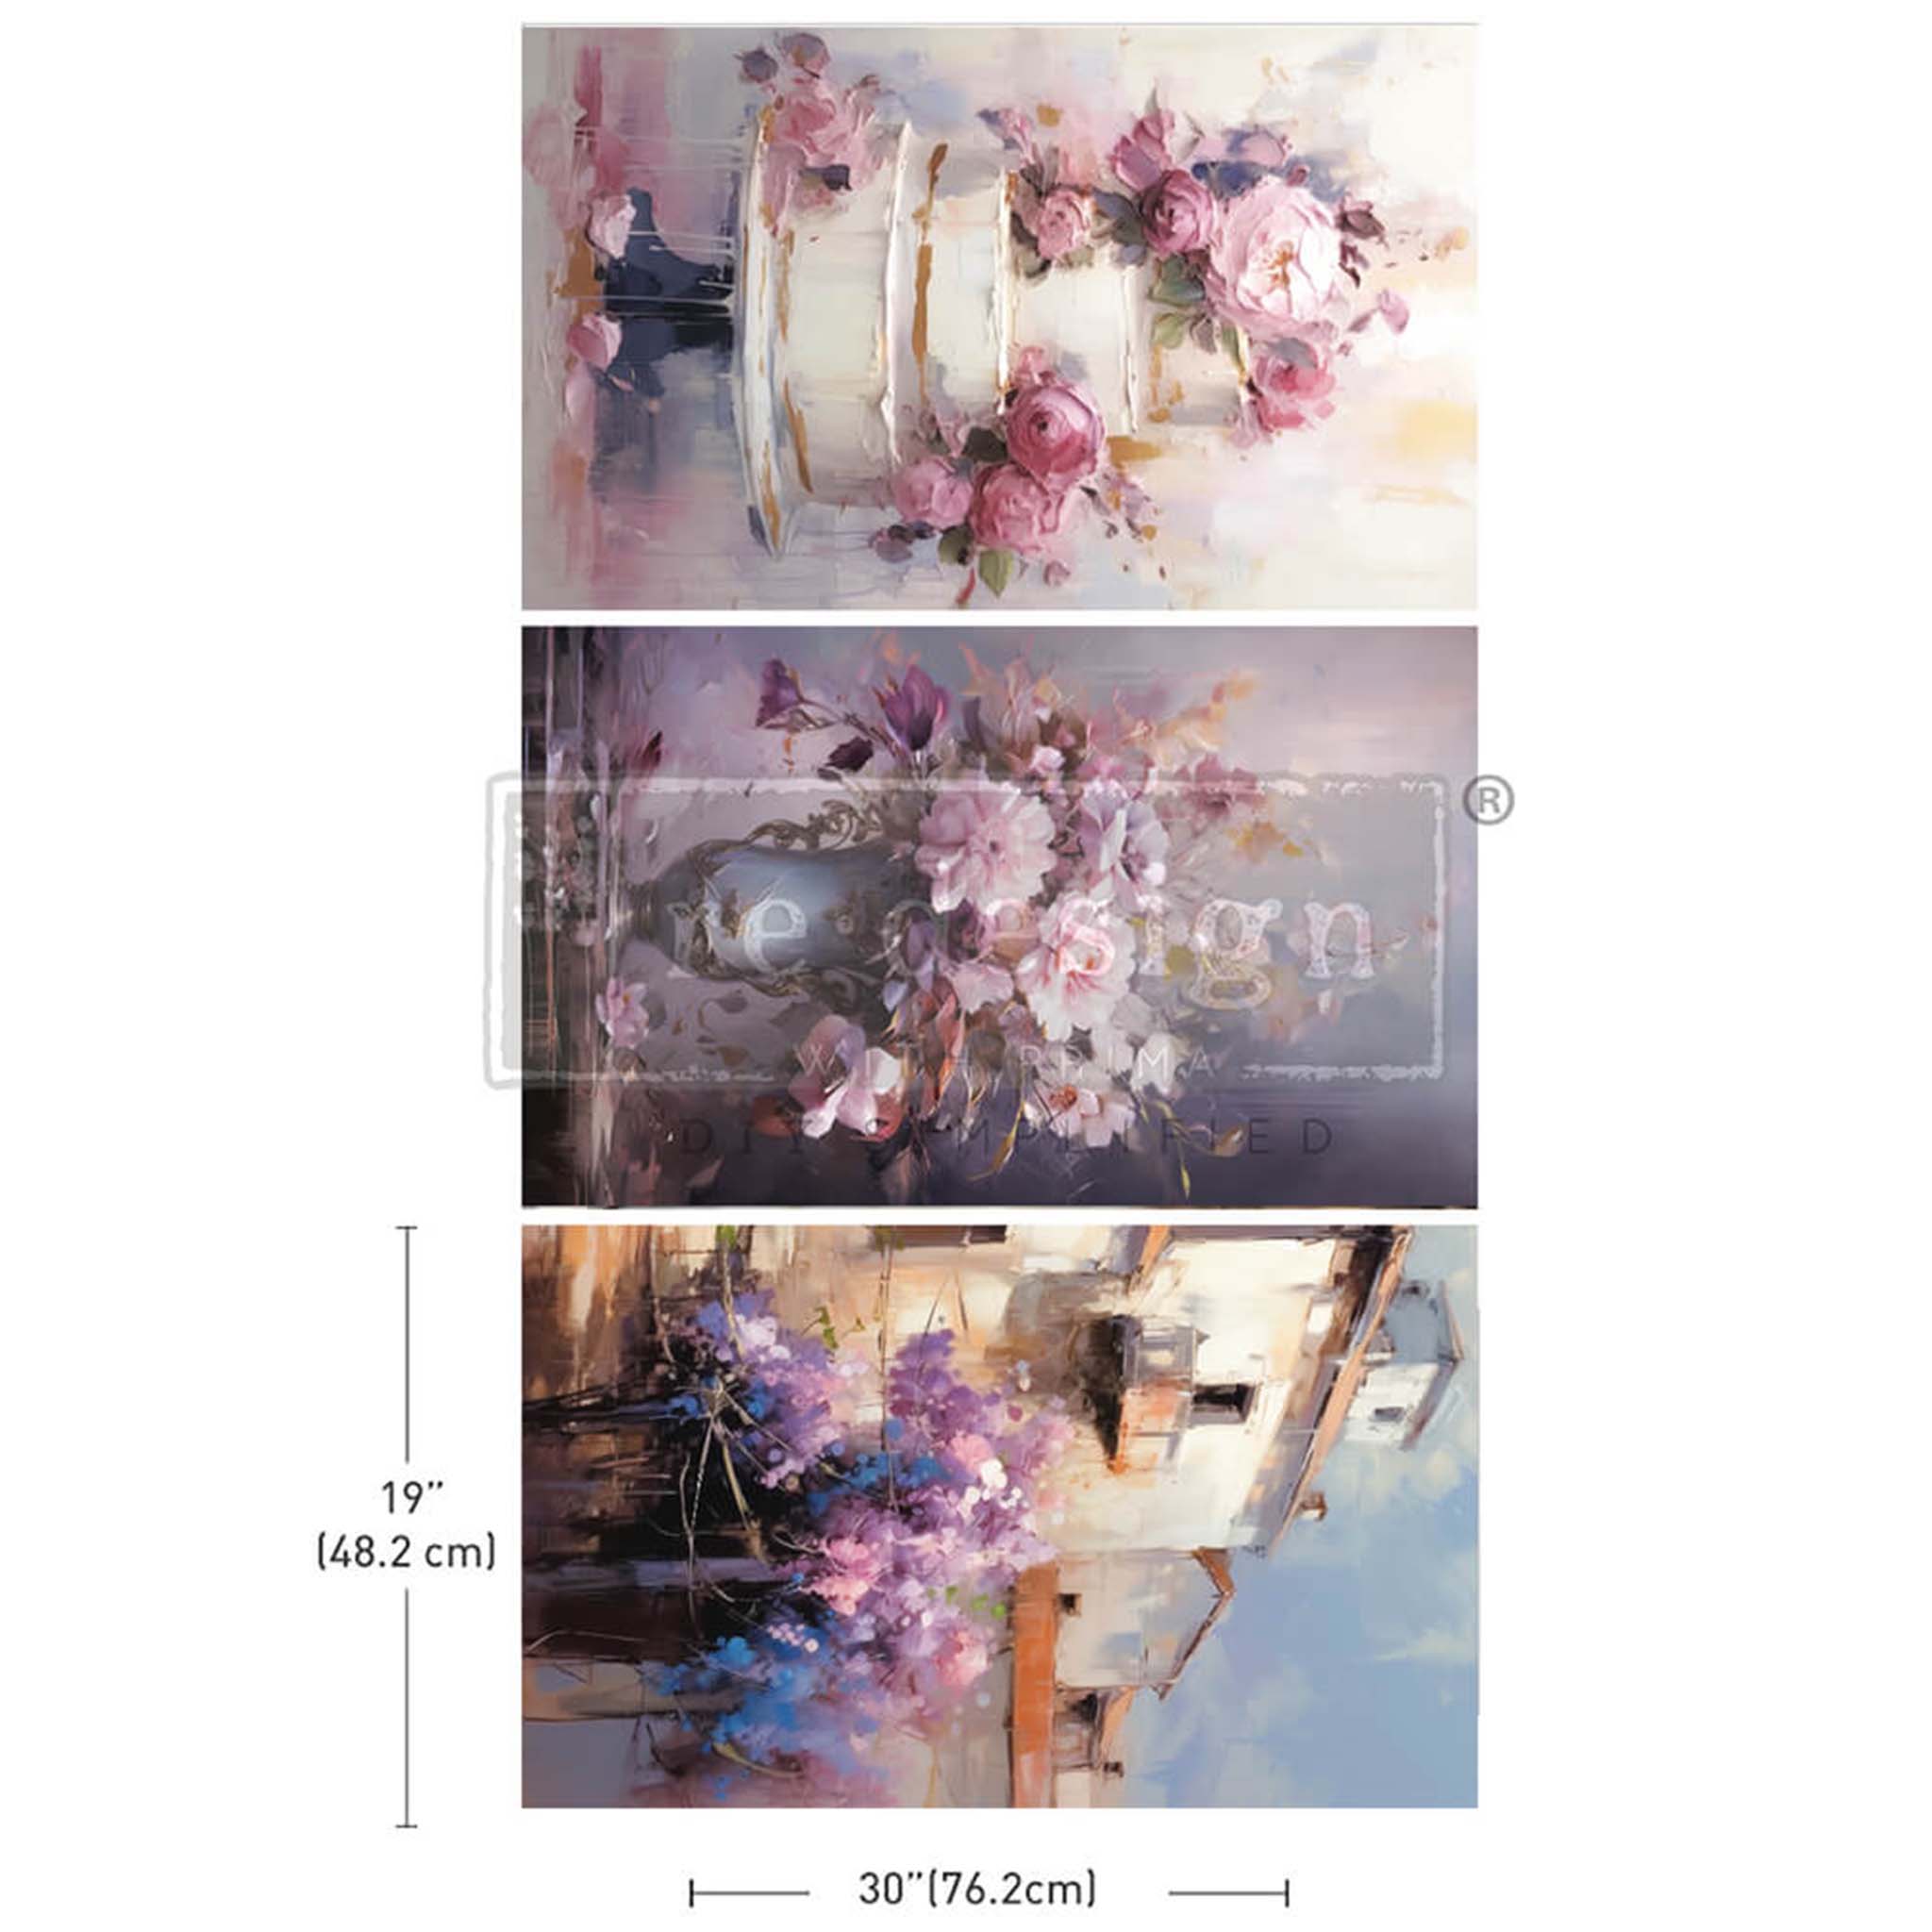 ReDesign with Prima's Lilac Lush Celebration tissue paper is against a white background. Measurements for 1 sheet reads: 19" (48.2 cm) by 30" (76.2 cm).